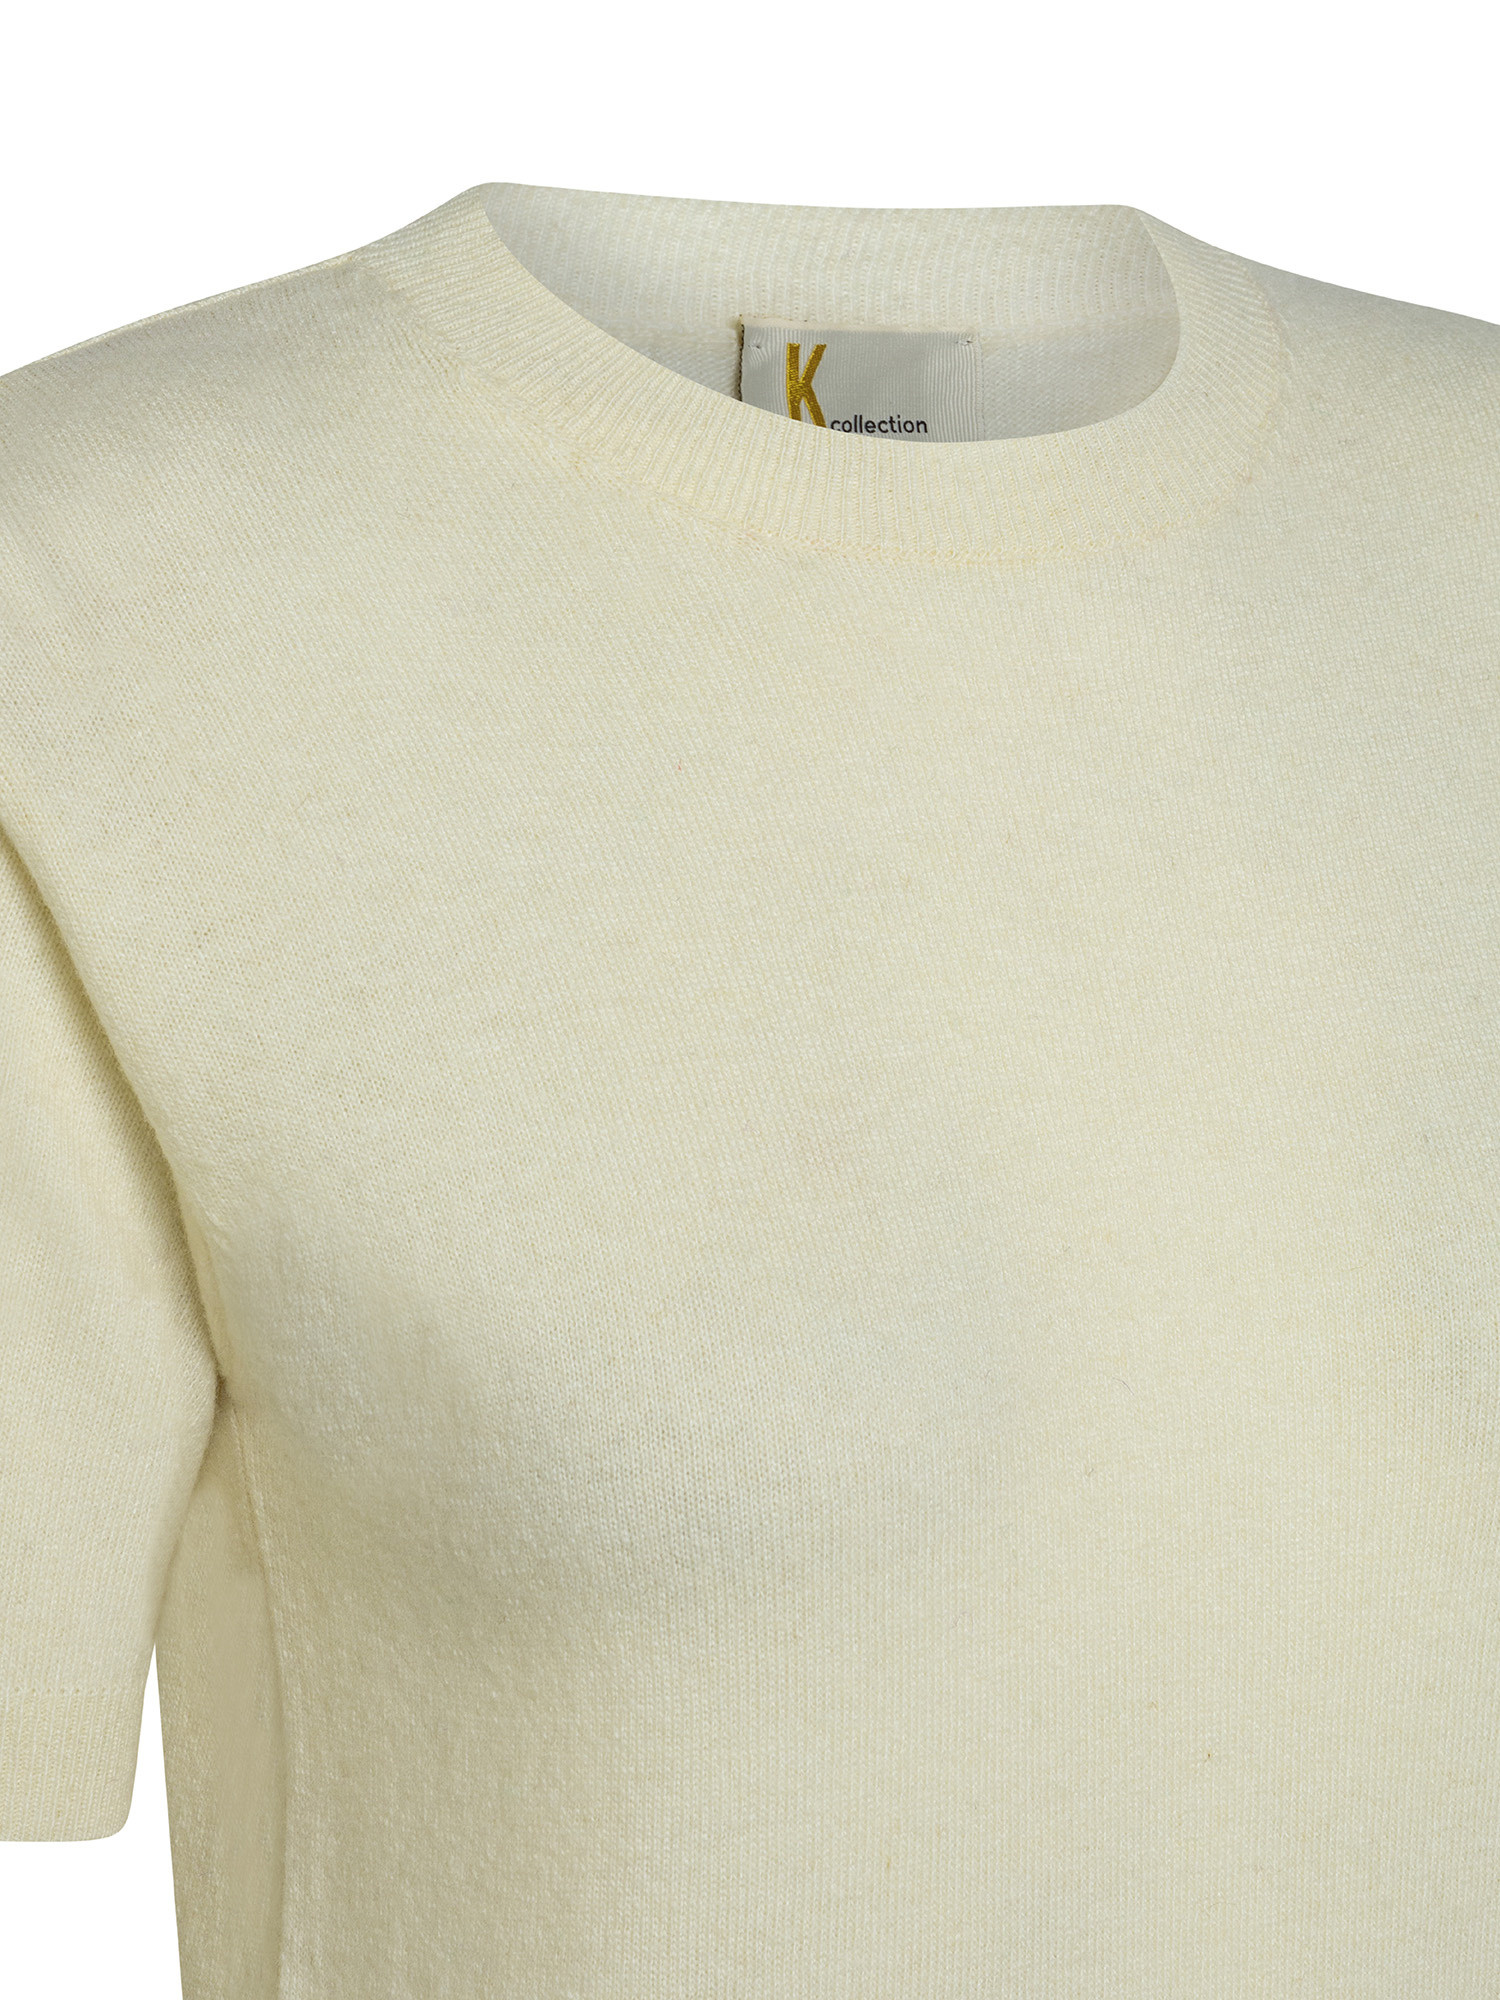 K Collection - Crewneck sweater, White Cream, large image number 2